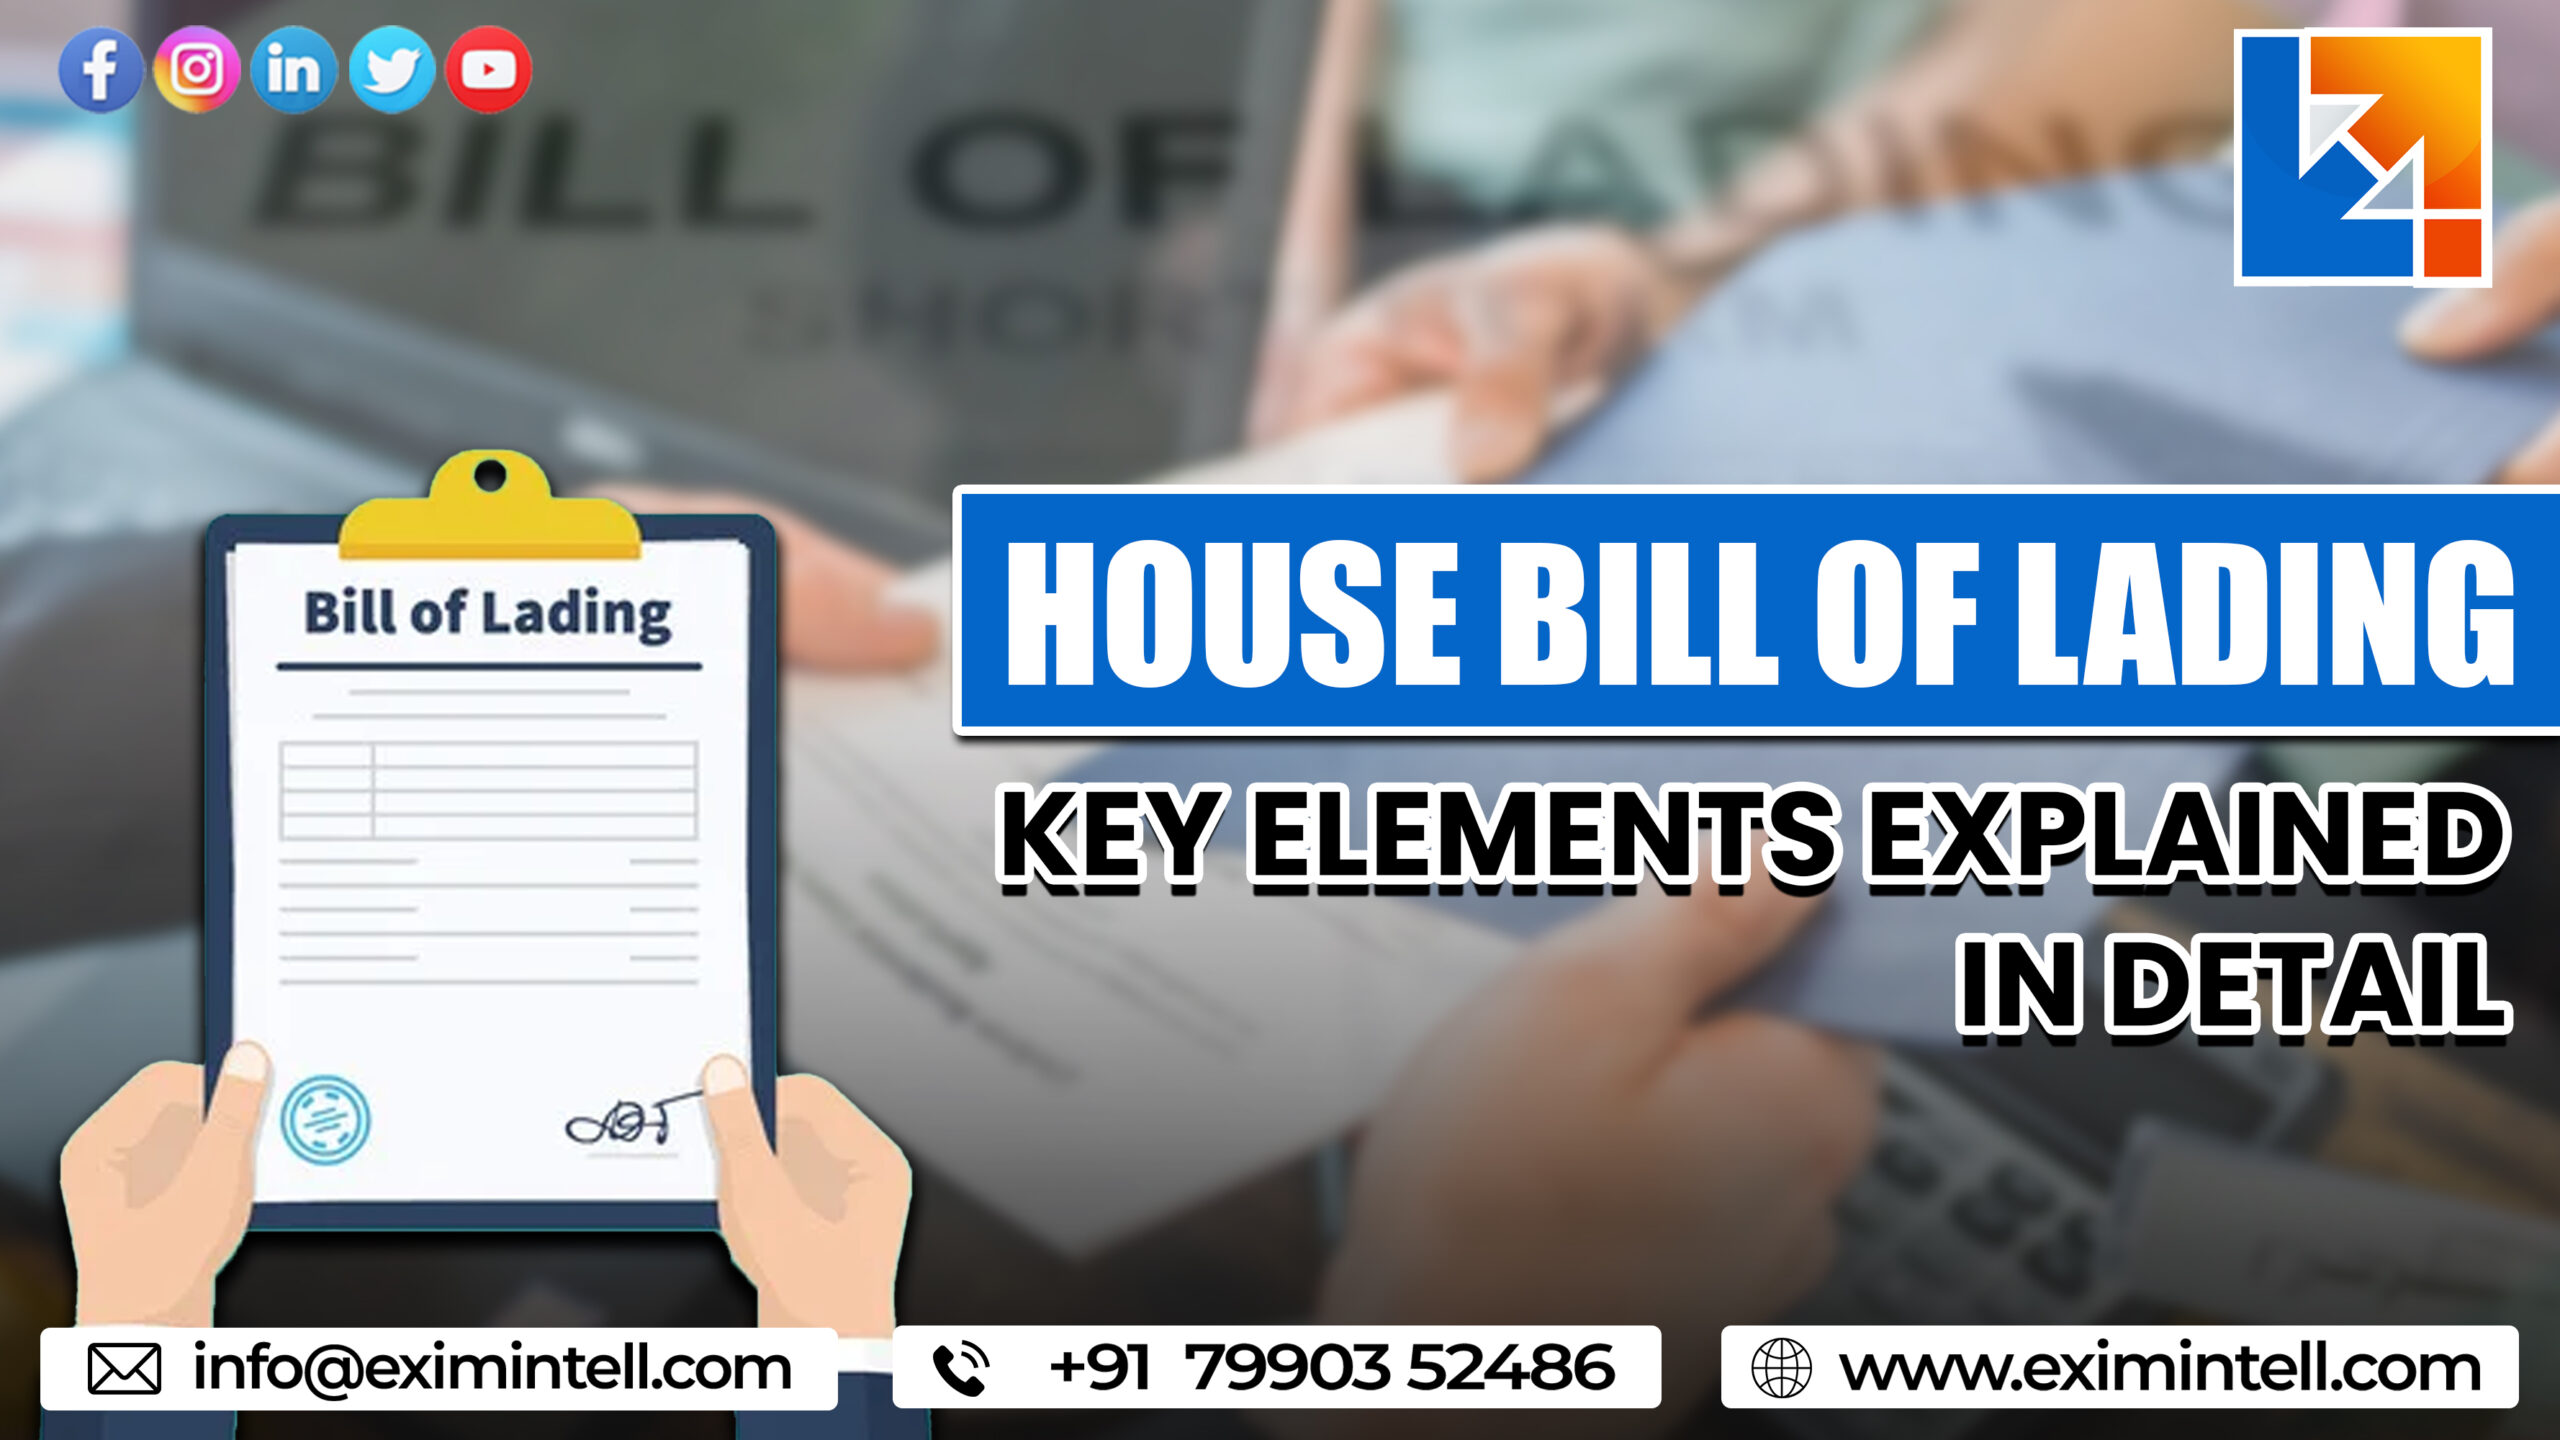 House Bill of Lading: Key elements explained in detail